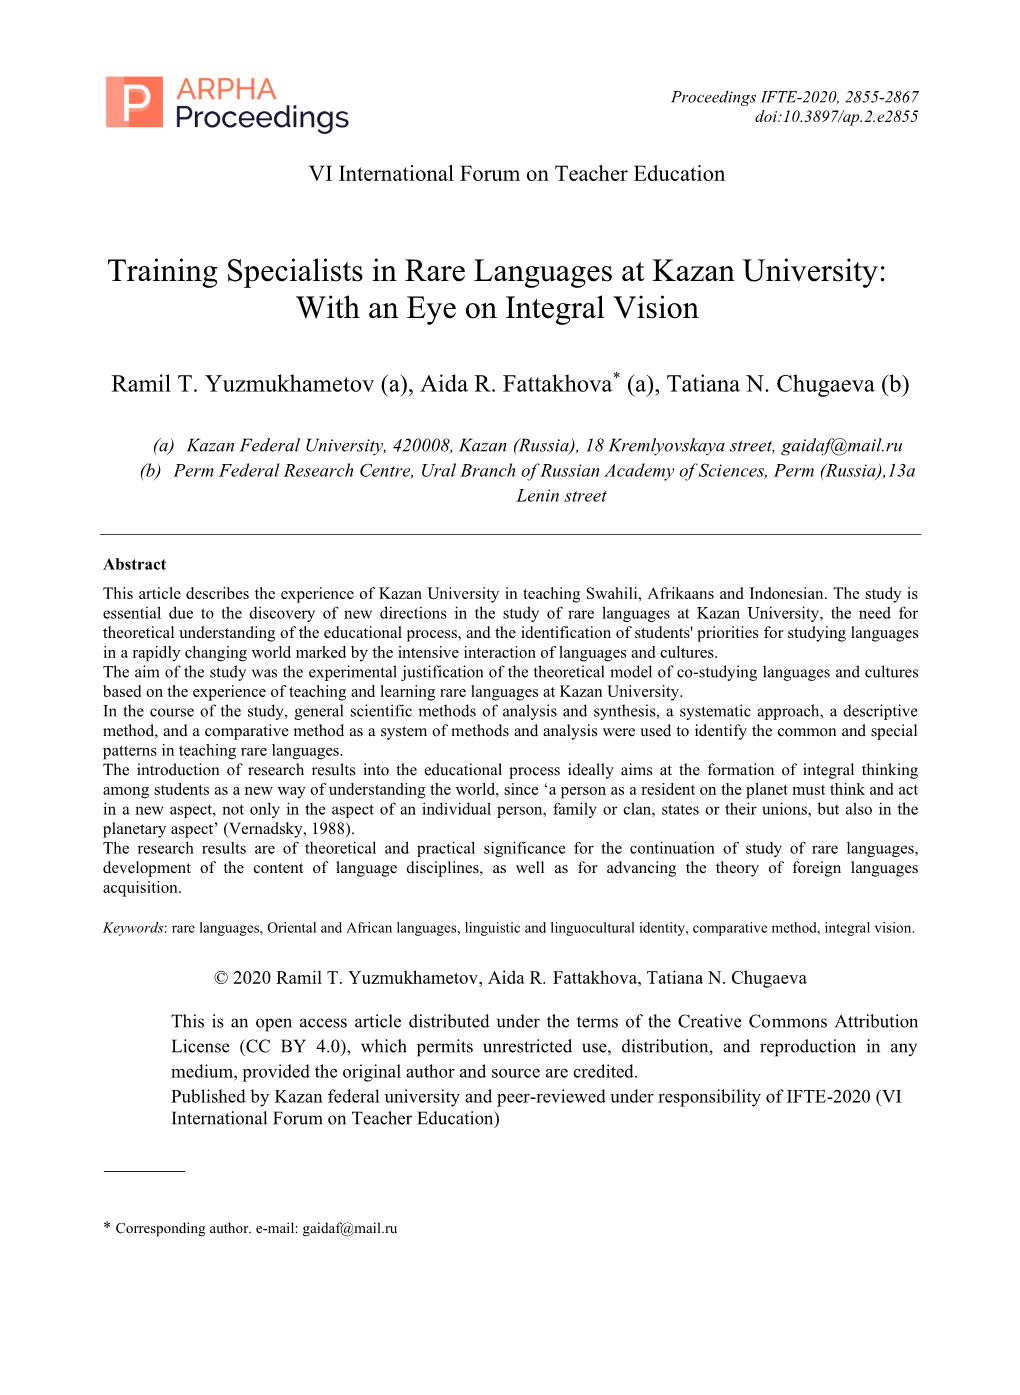 Training Specialists in Rare Languages at Kazan University: with an Eye on Integral Vision